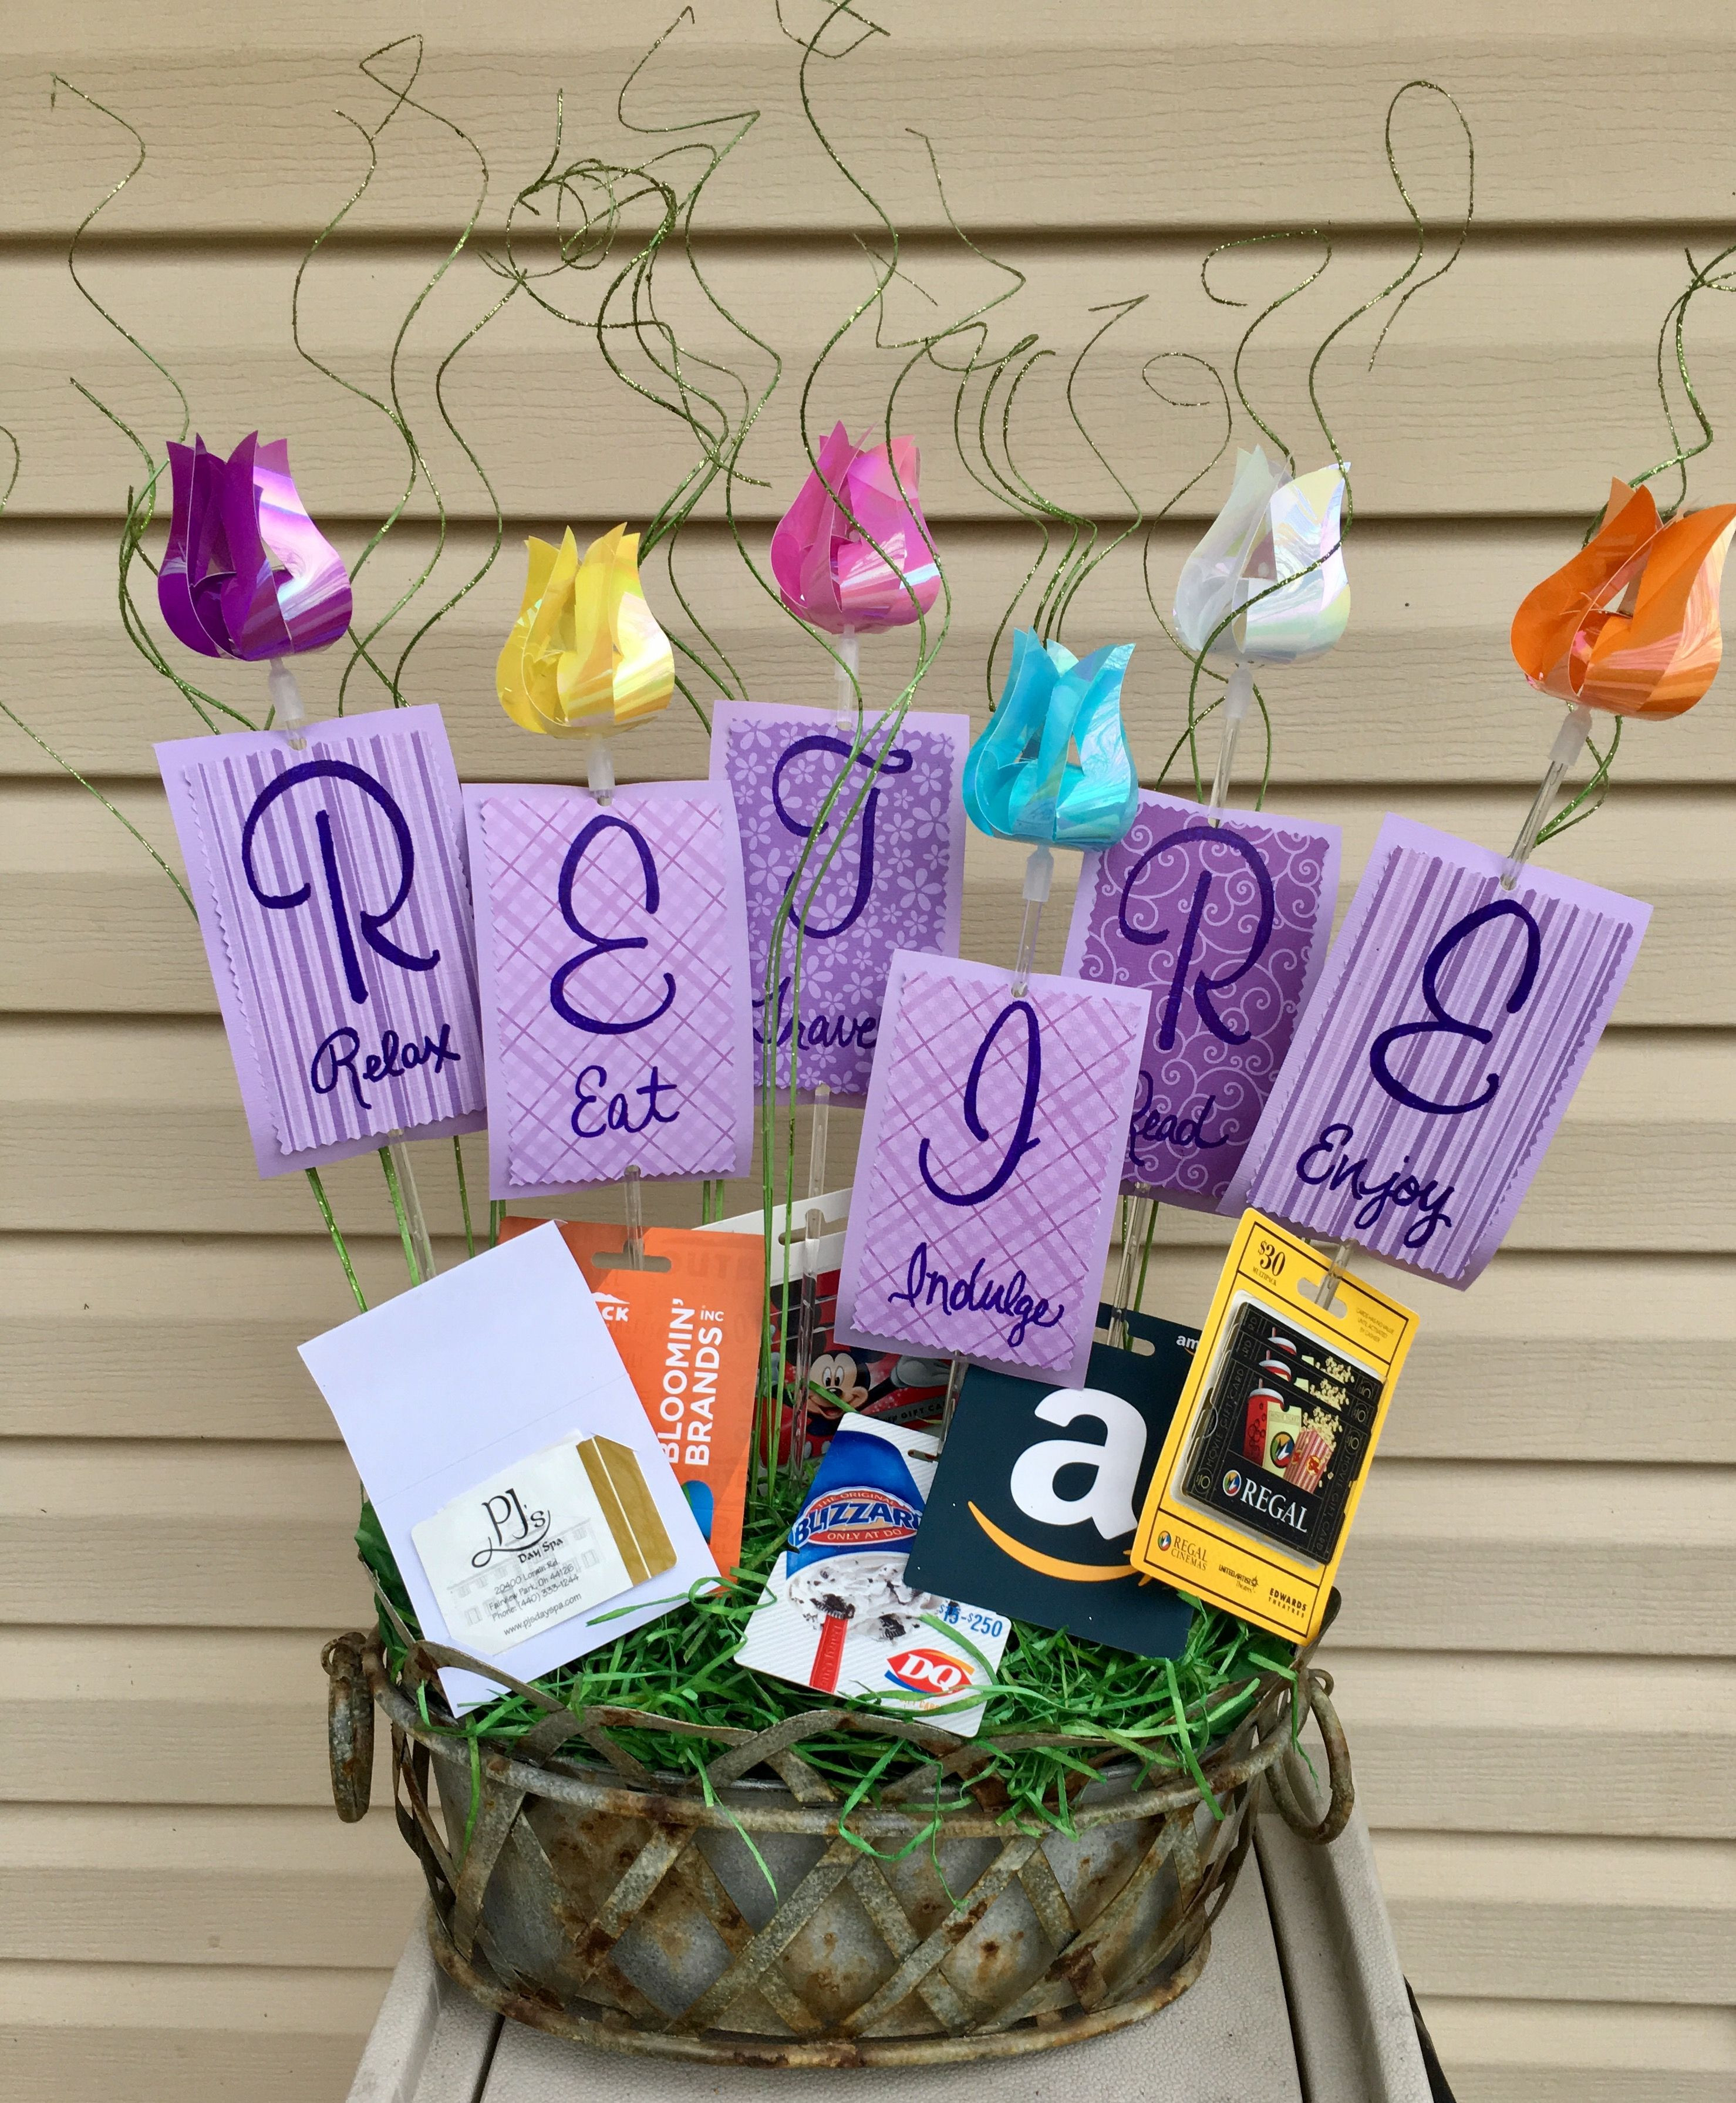 Fun Ideas For A Retirement Party
 Retirement t basket with t cards Relax Eat Travel